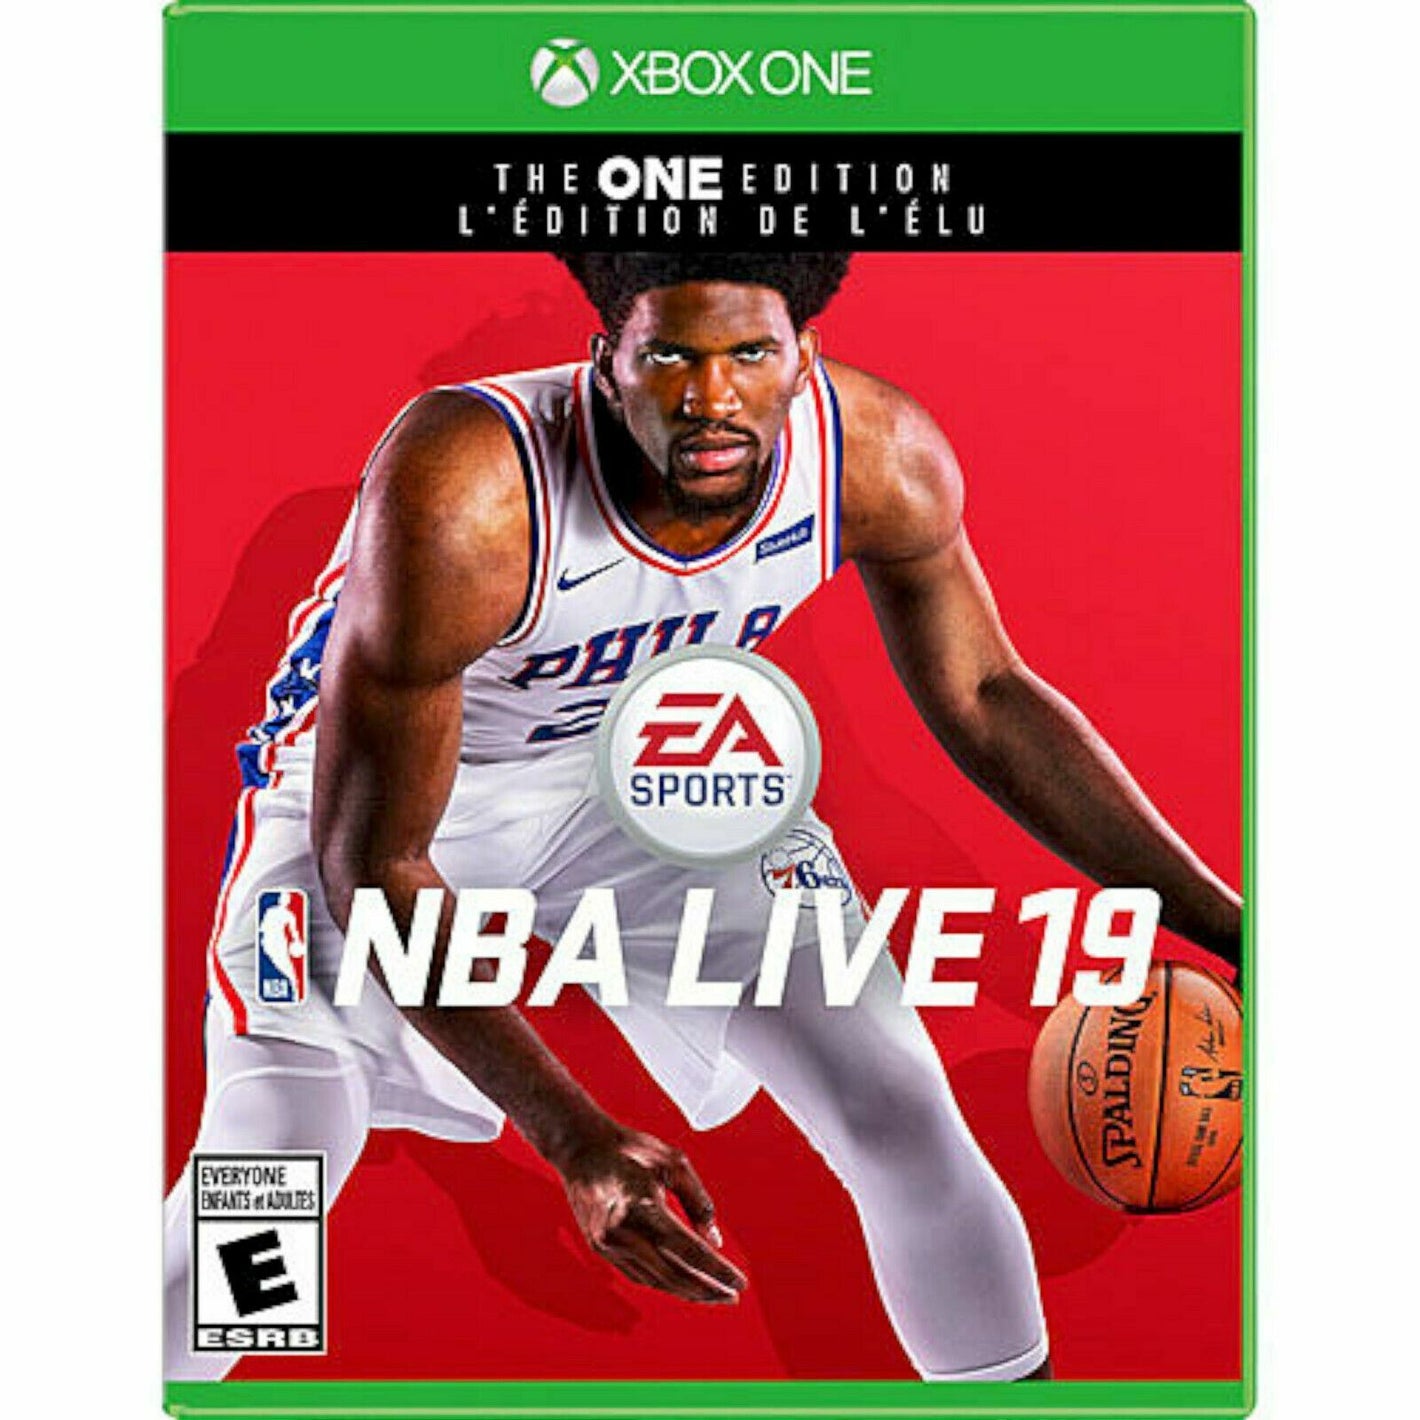 NEW NBA Live 19 The ONE Edition Xbox One French Video Game KOBE mamba basketball